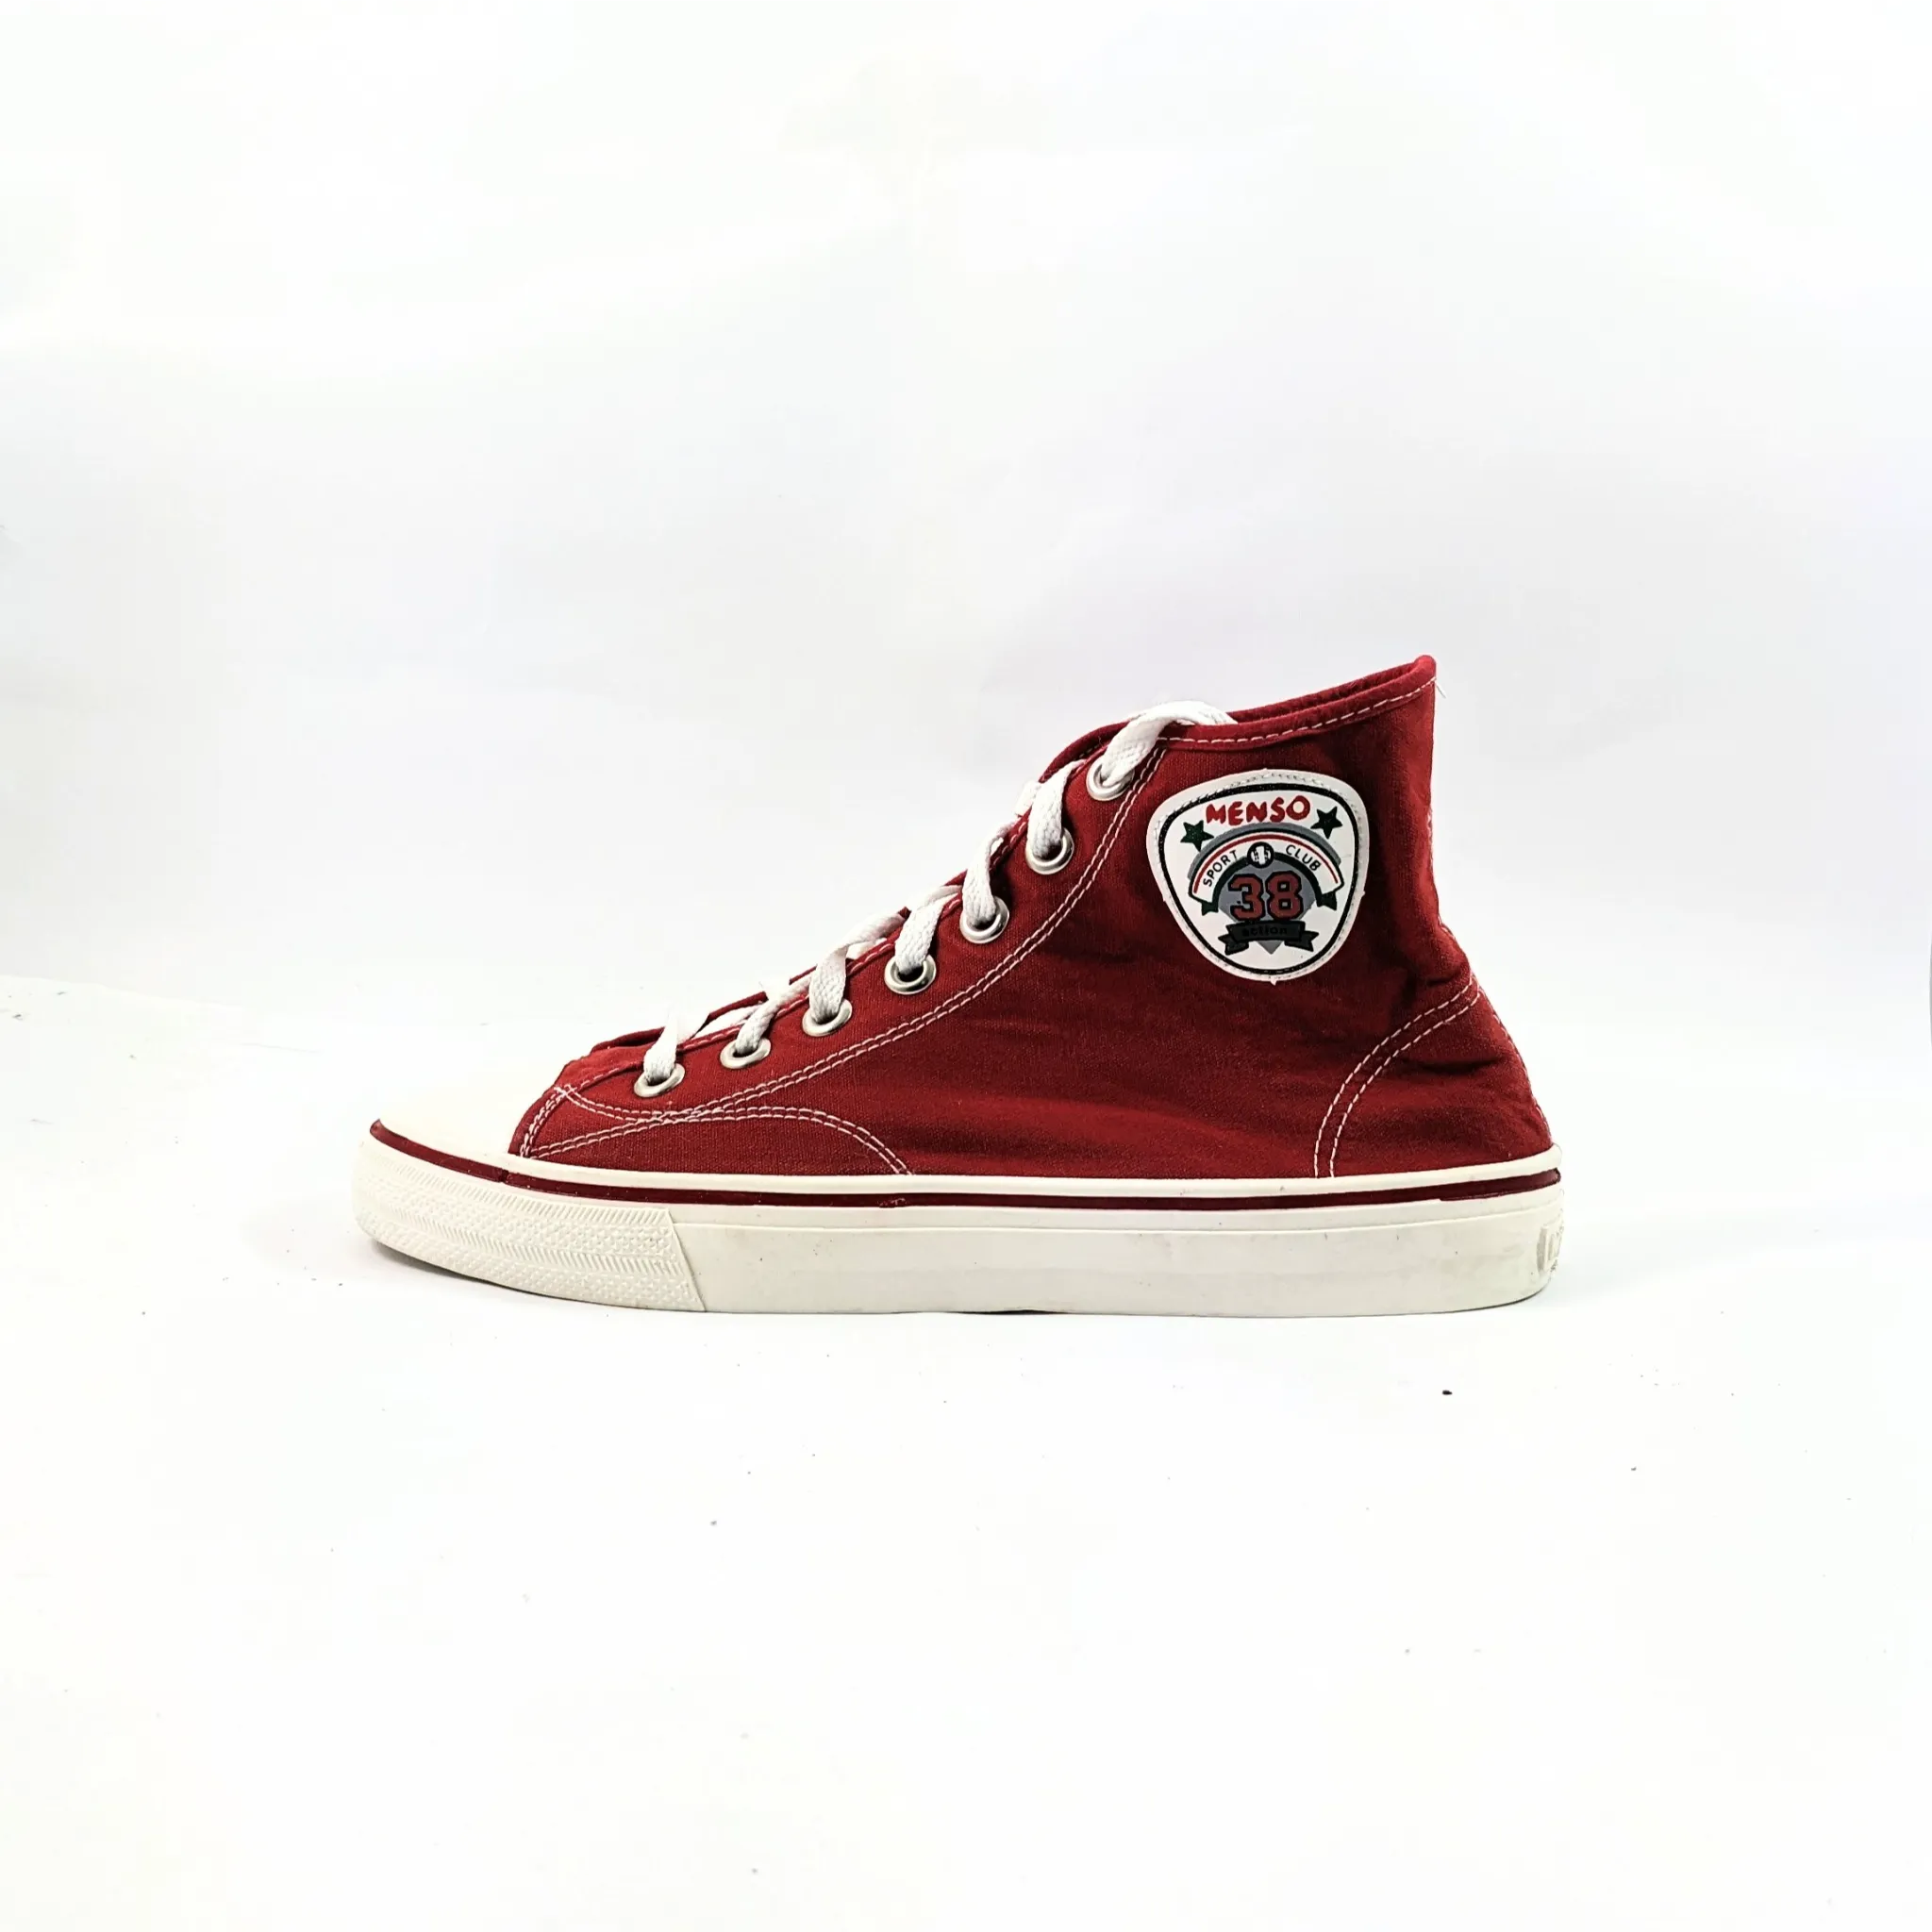 Menso Red Hightops